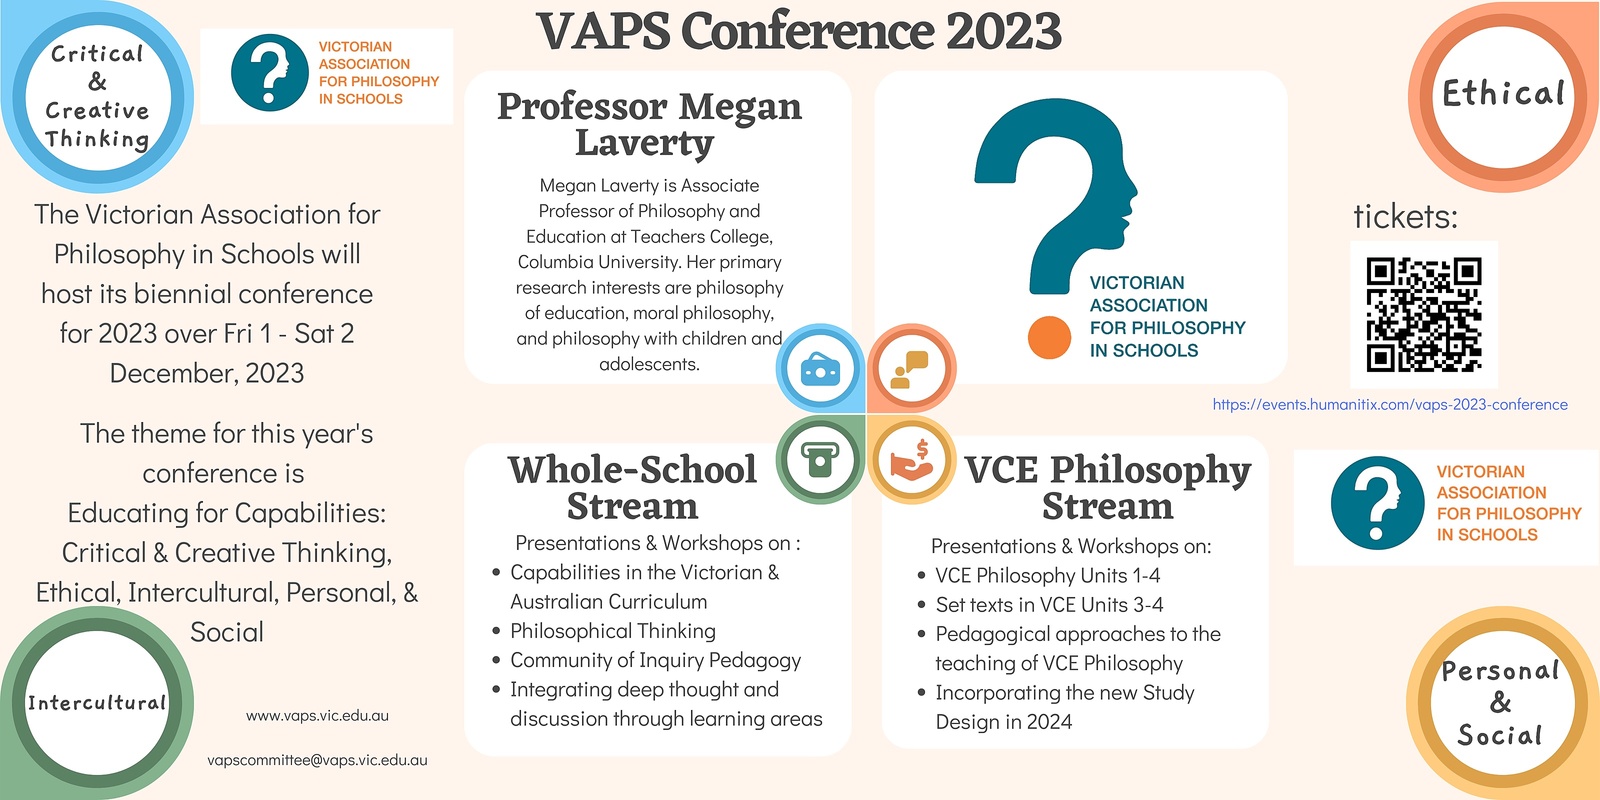 Banner image for VAPS 2023 Conference: Educating for Capabilities: Critical & Creative Thinking, Ethical, Intercultural, Personal, & Social